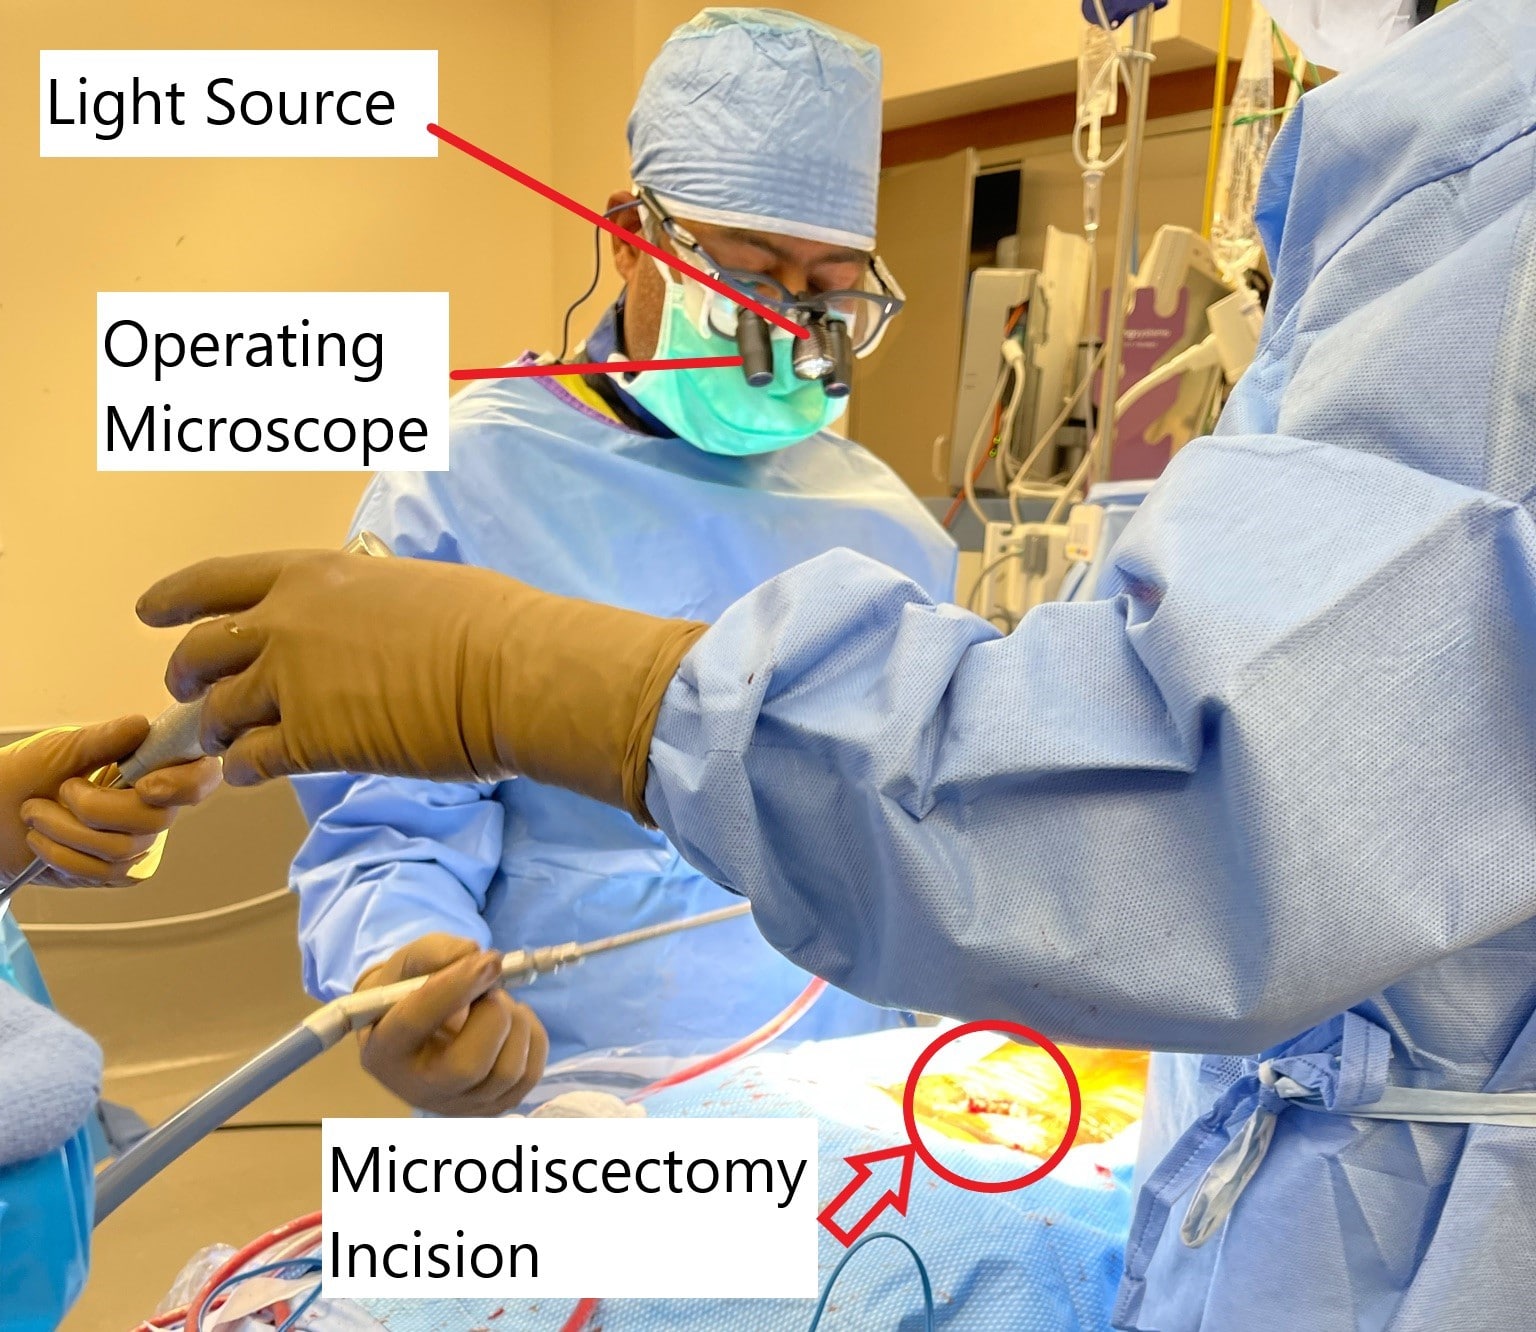 Intraoperative image showing microdiscectomy surgery.